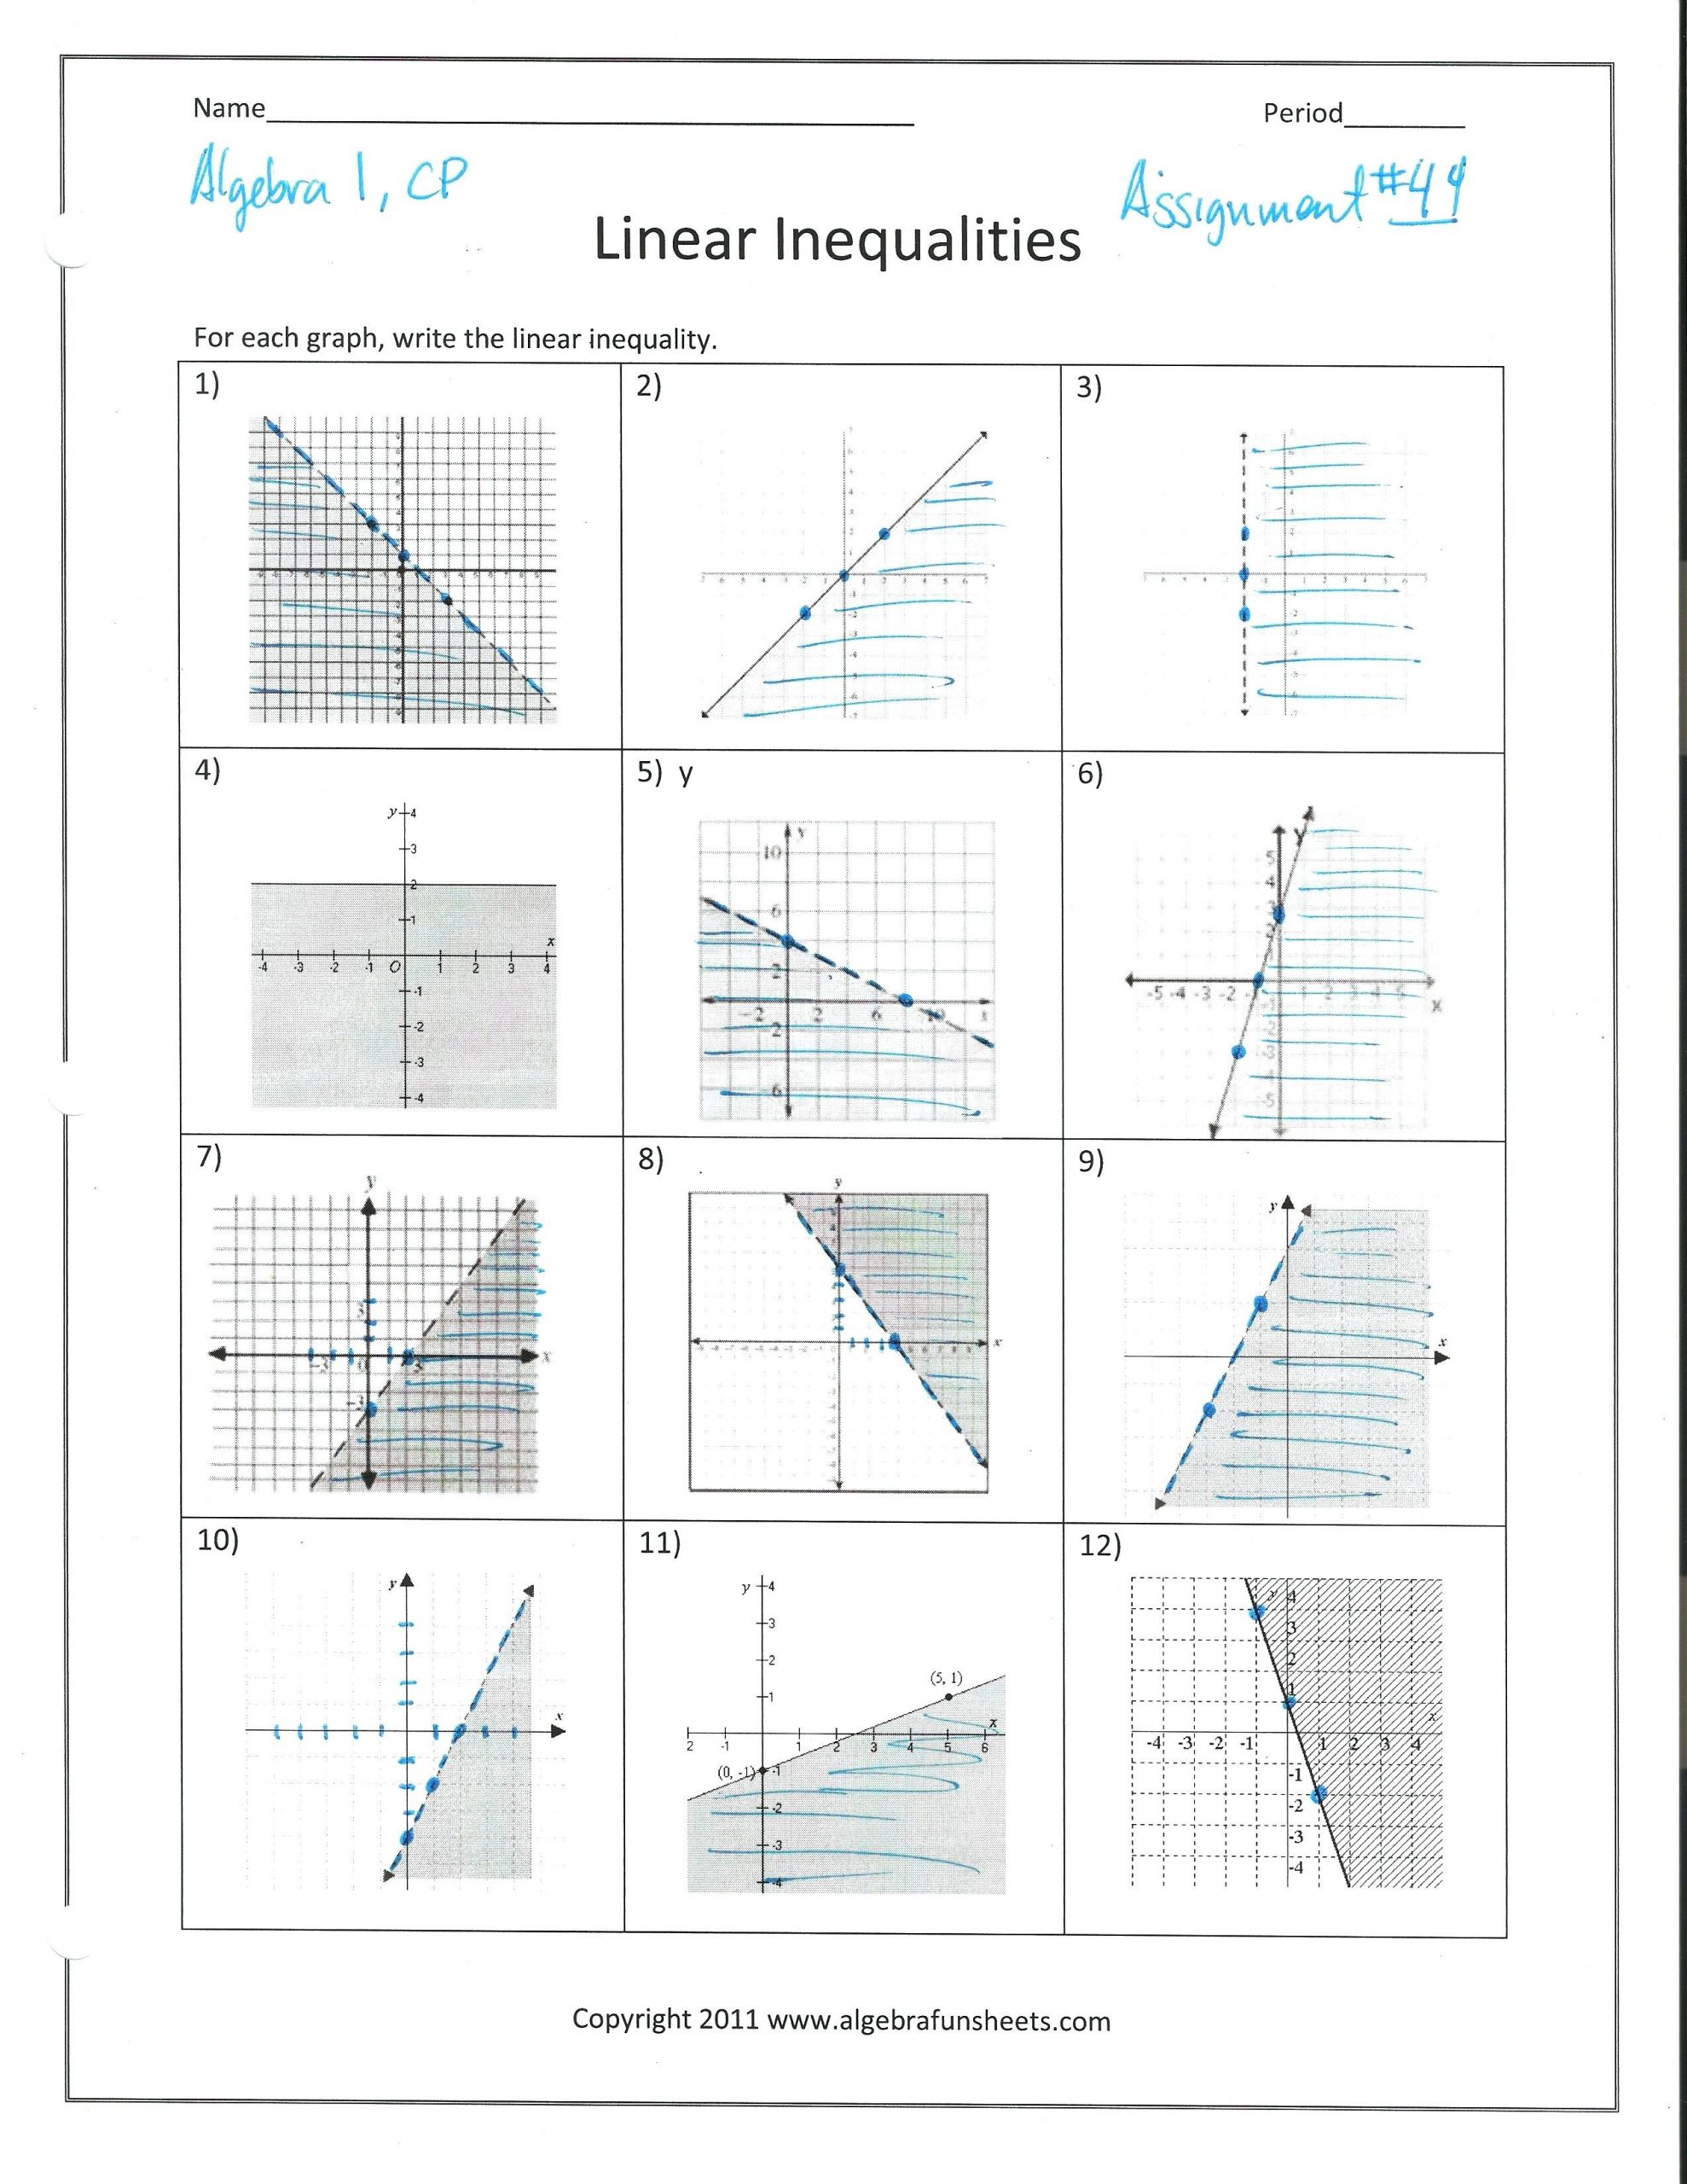 Graphing Linear Inequalities Worksheet Answers Constructing Graphs Worksheet Verdonck